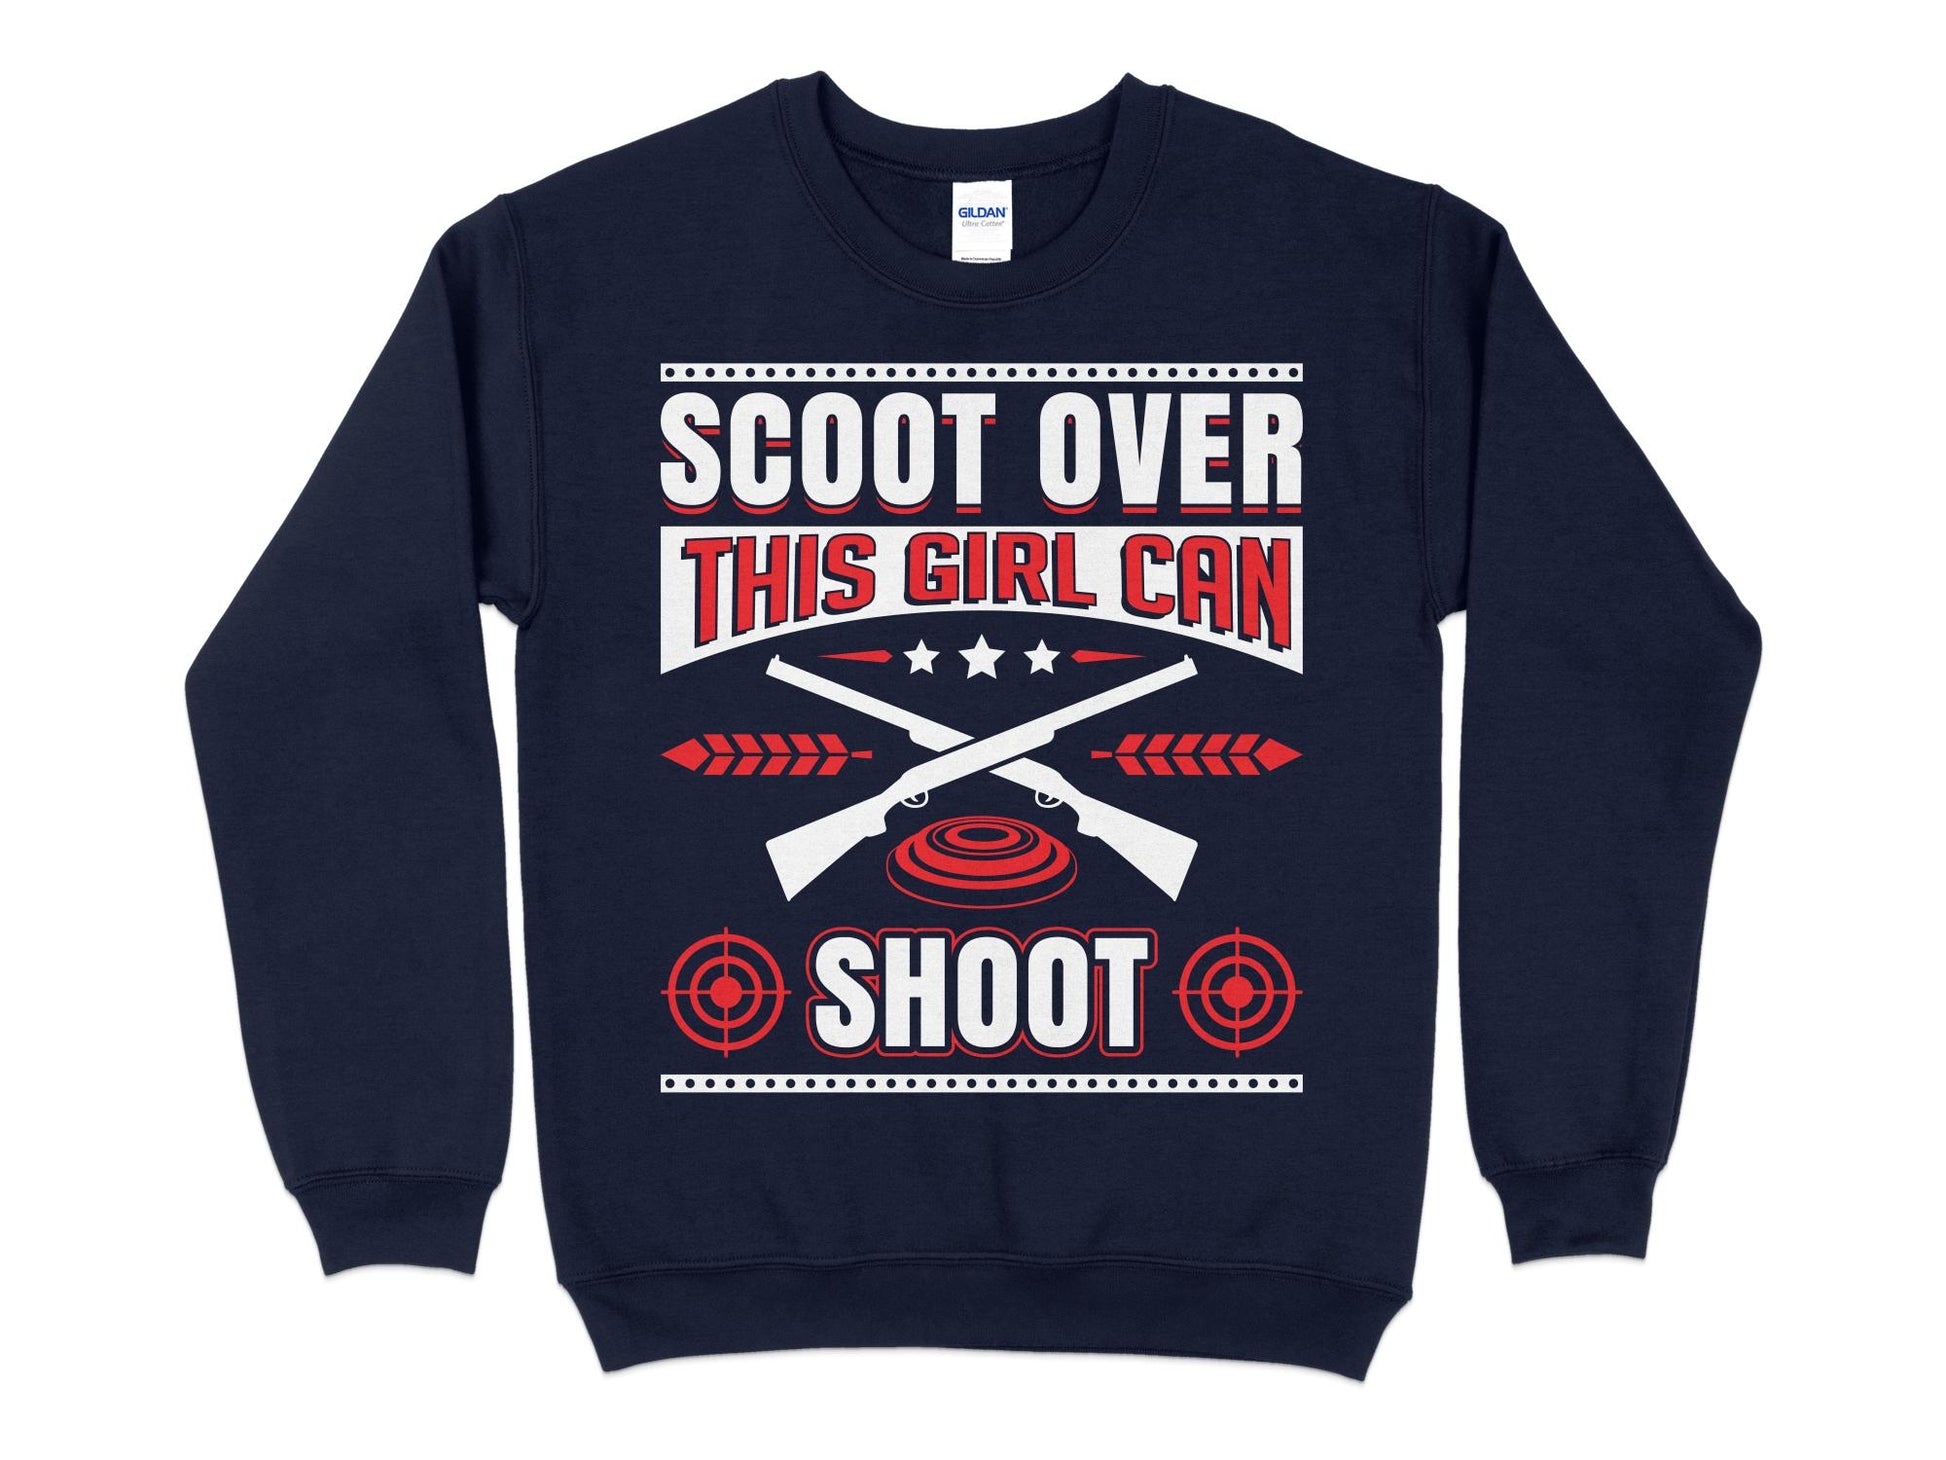 Trap Shooting Sweatshirt - Scoot Over This Girl Can Shoot, navy blue